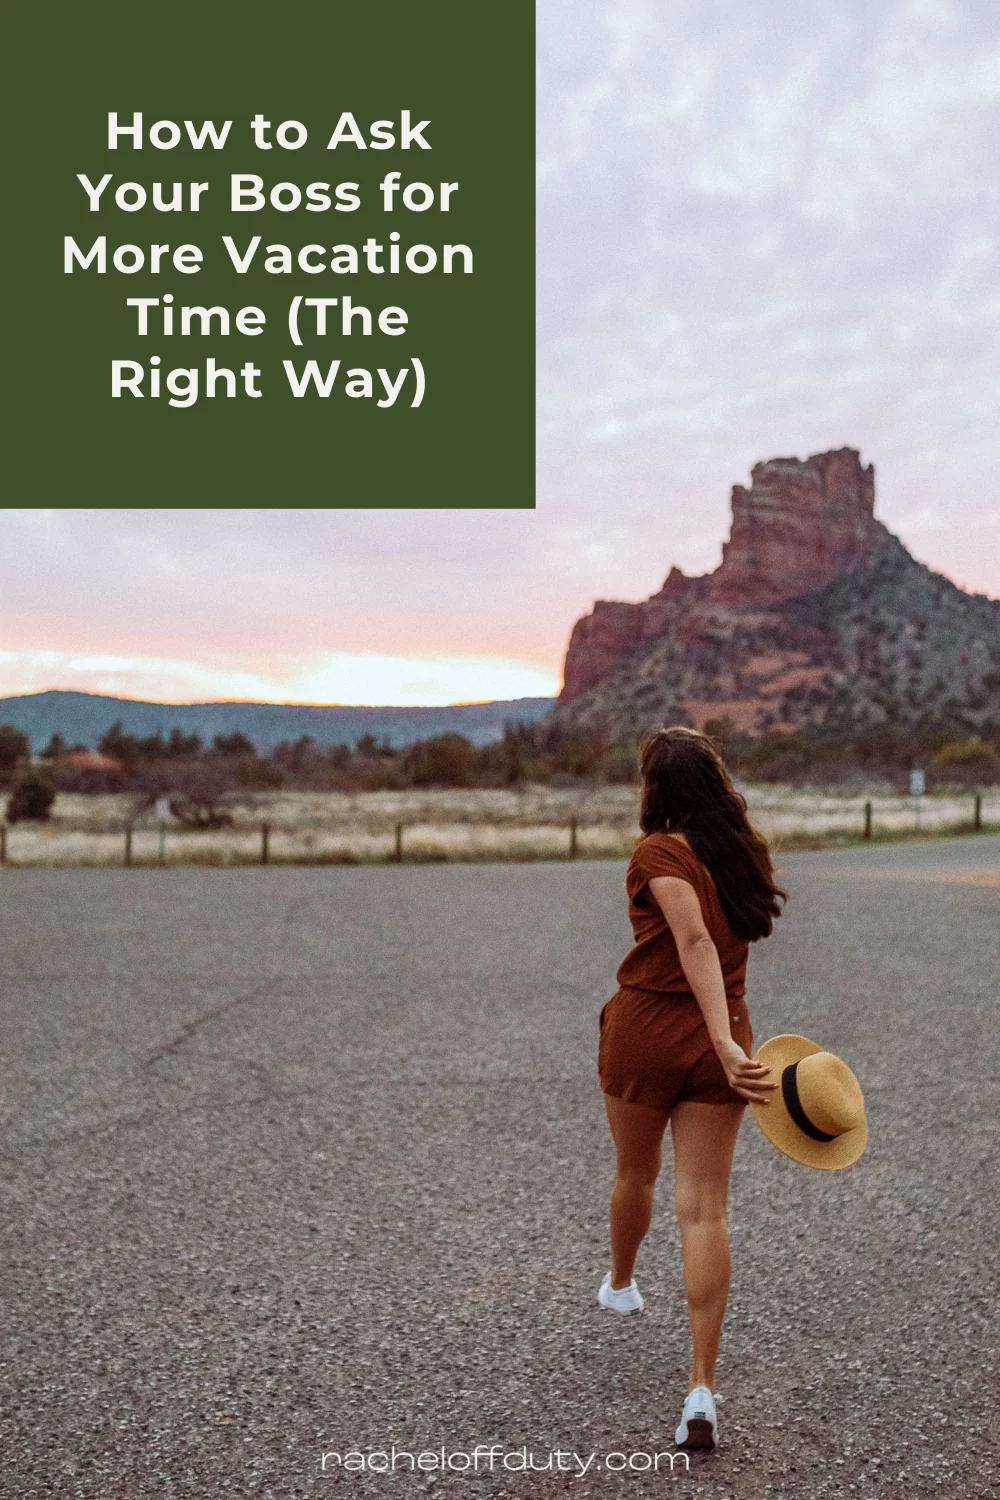 How to Ask Your Boss for More Vacation Time (The Right Way) - Rachel Off Duty